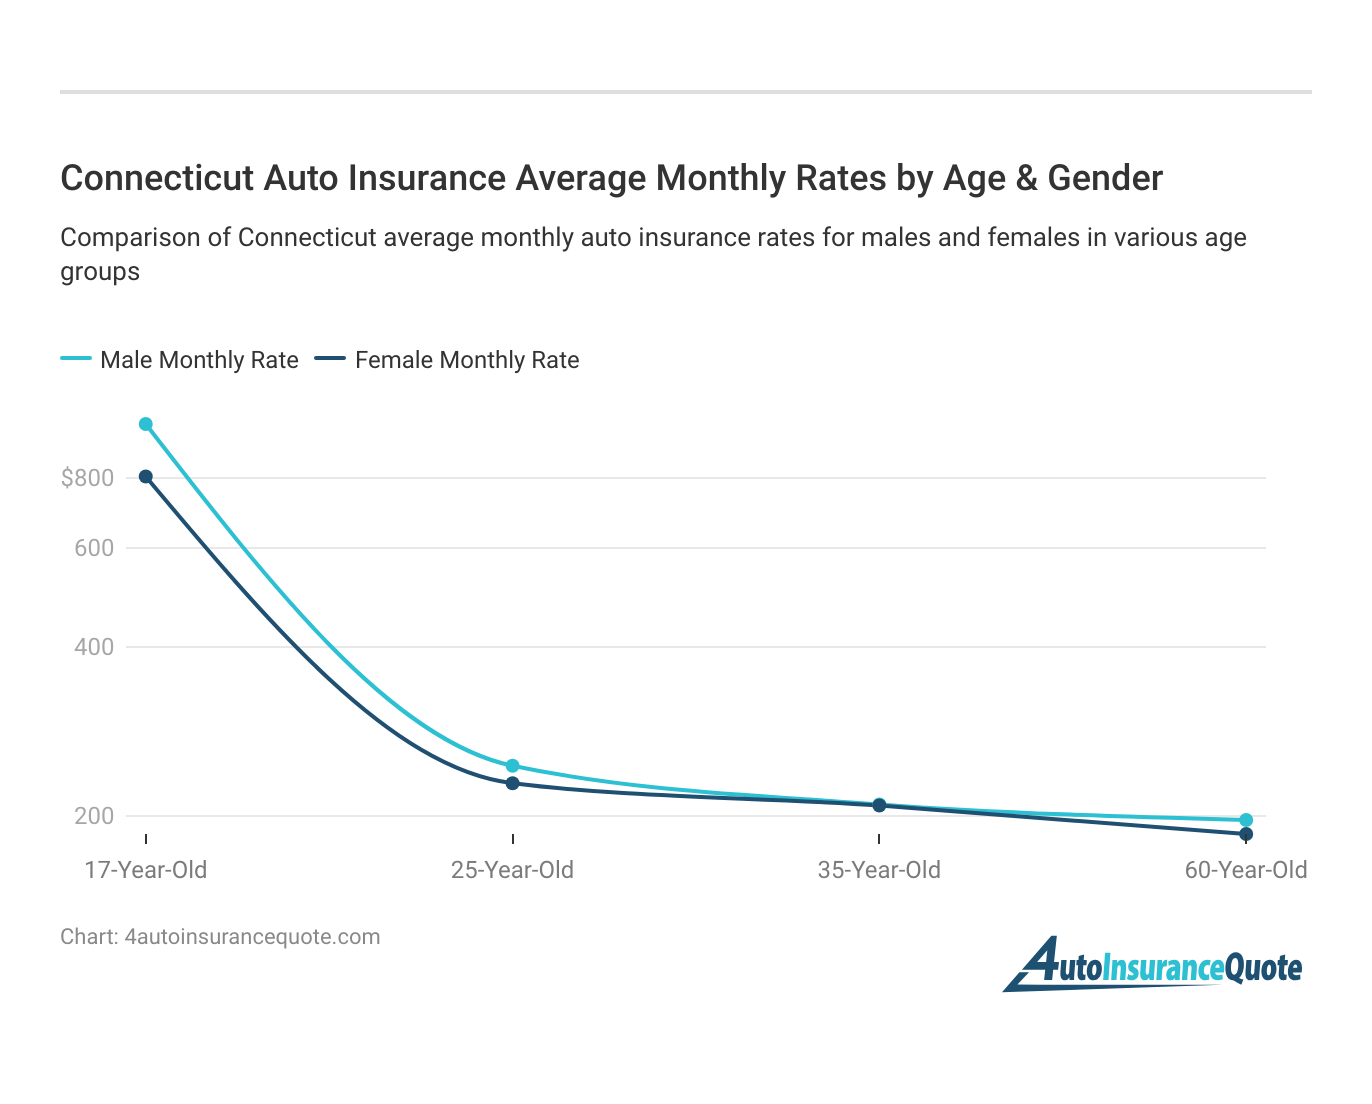 <h3>Connecticut Auto Insurance Average Monthly Rates by Age & Gender</h3>